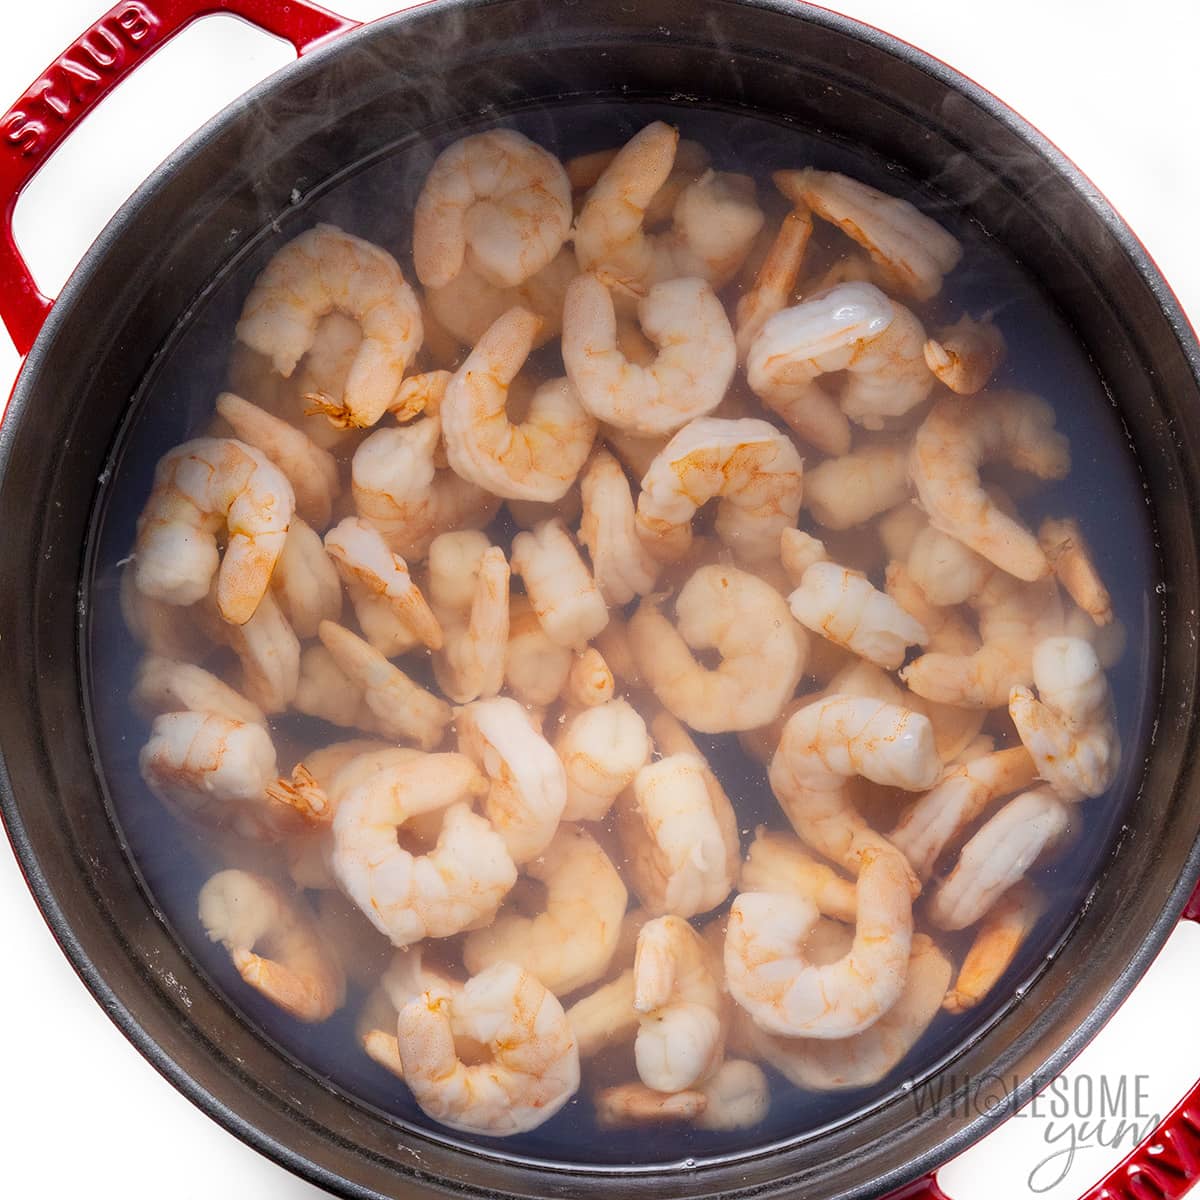 Shrimp being cooked in a pot of water.